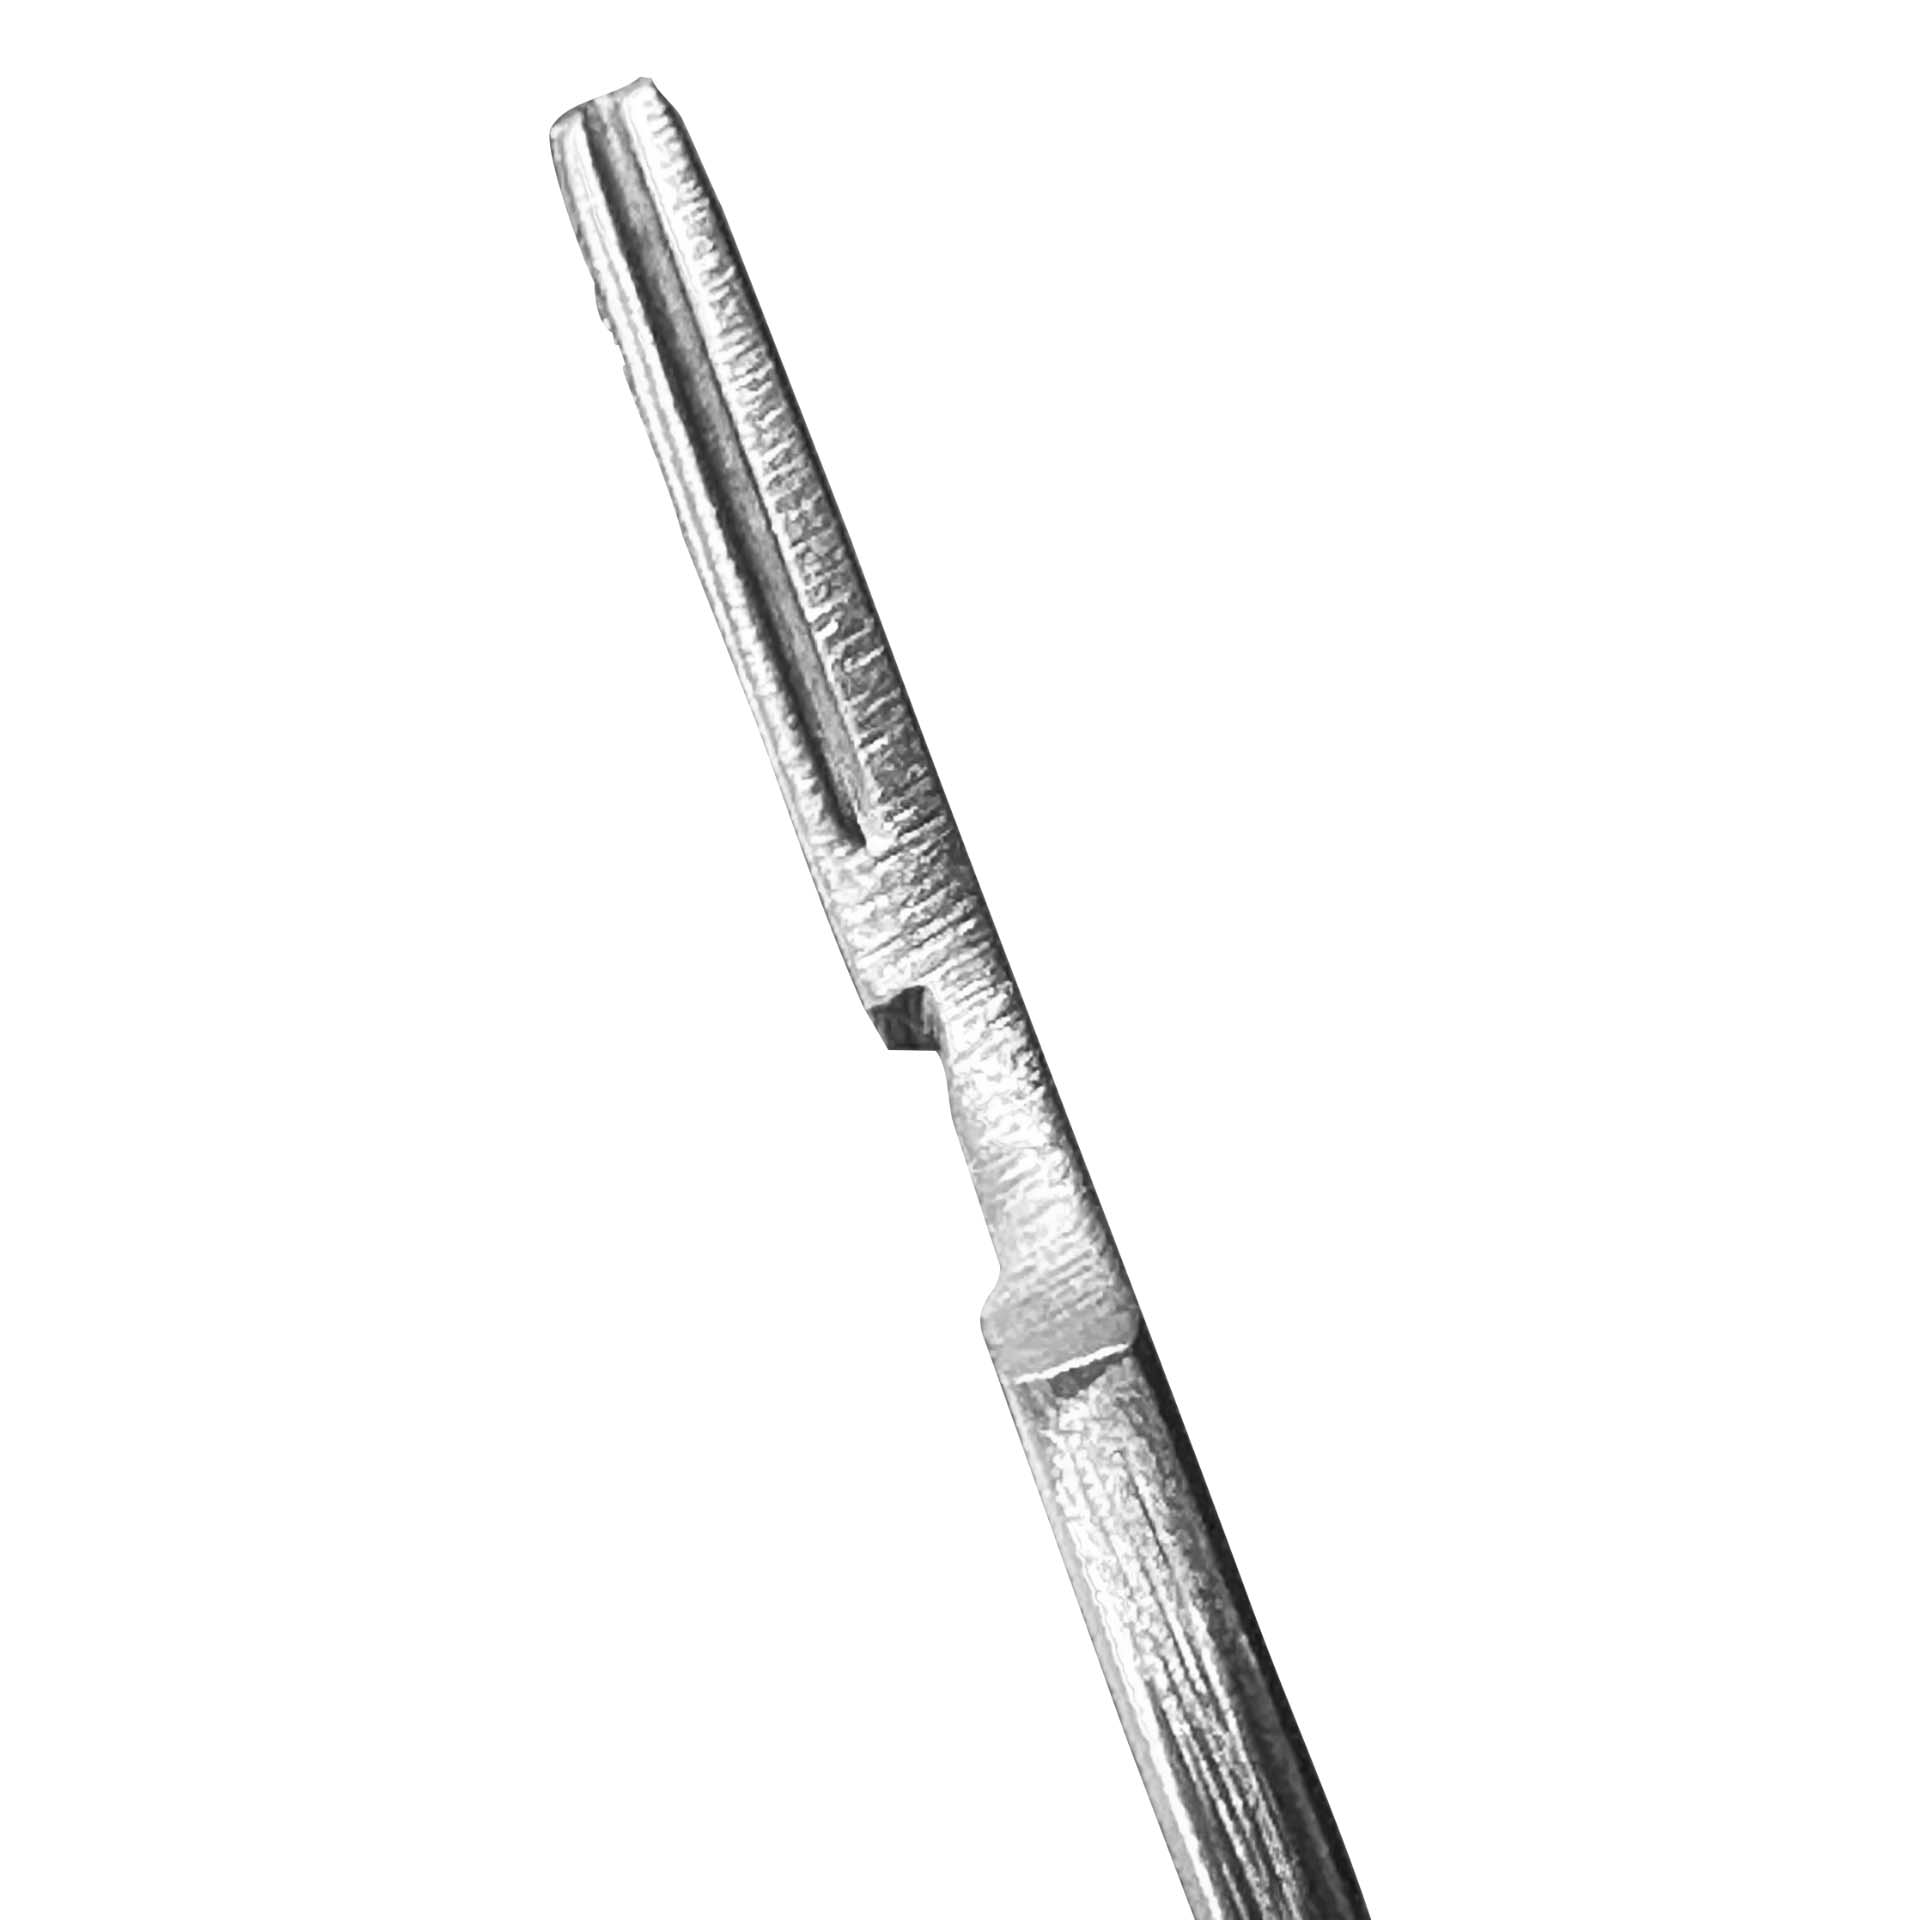 Size 3 Scalpel Handle Replacements for Scalpel Blades Size 10 & 15